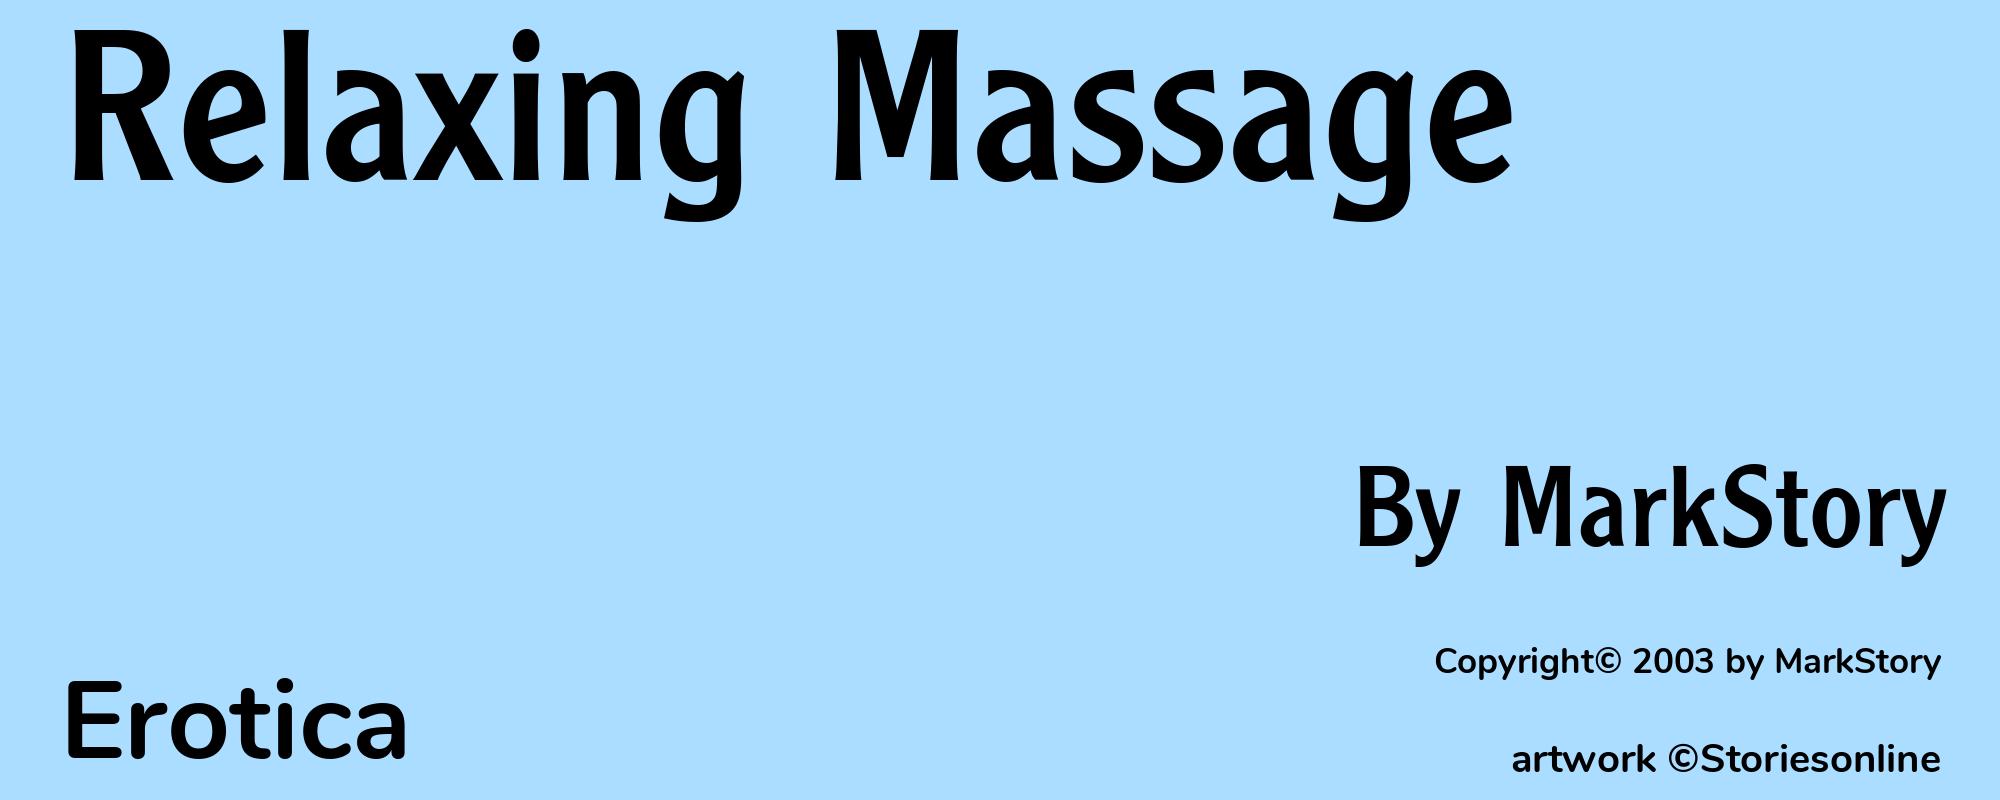 Relaxing Massage - Cover